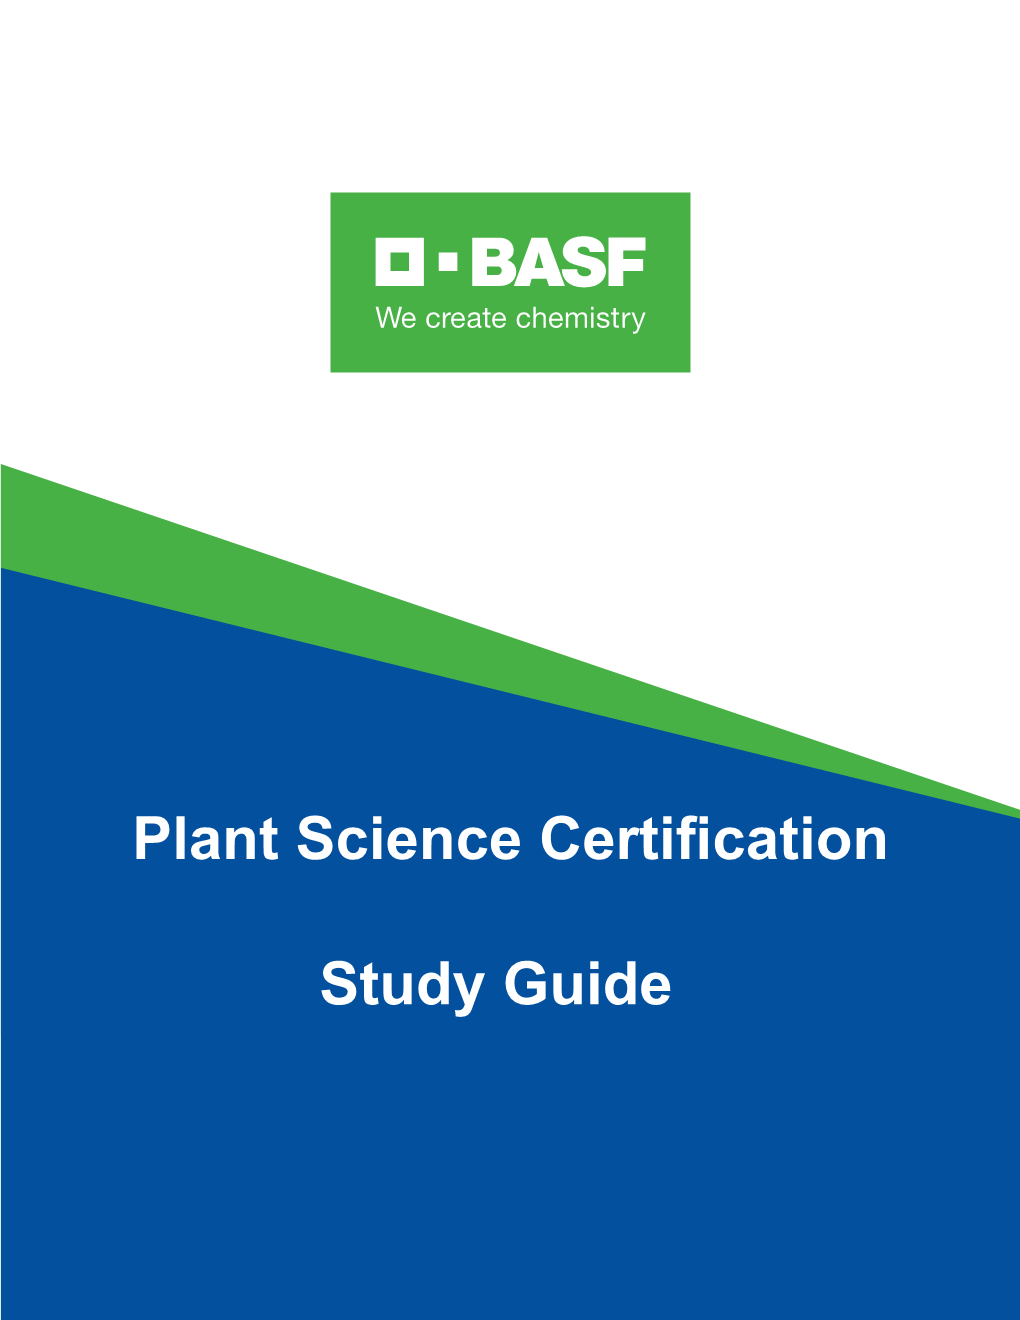 Plant Science Certification Study Guide